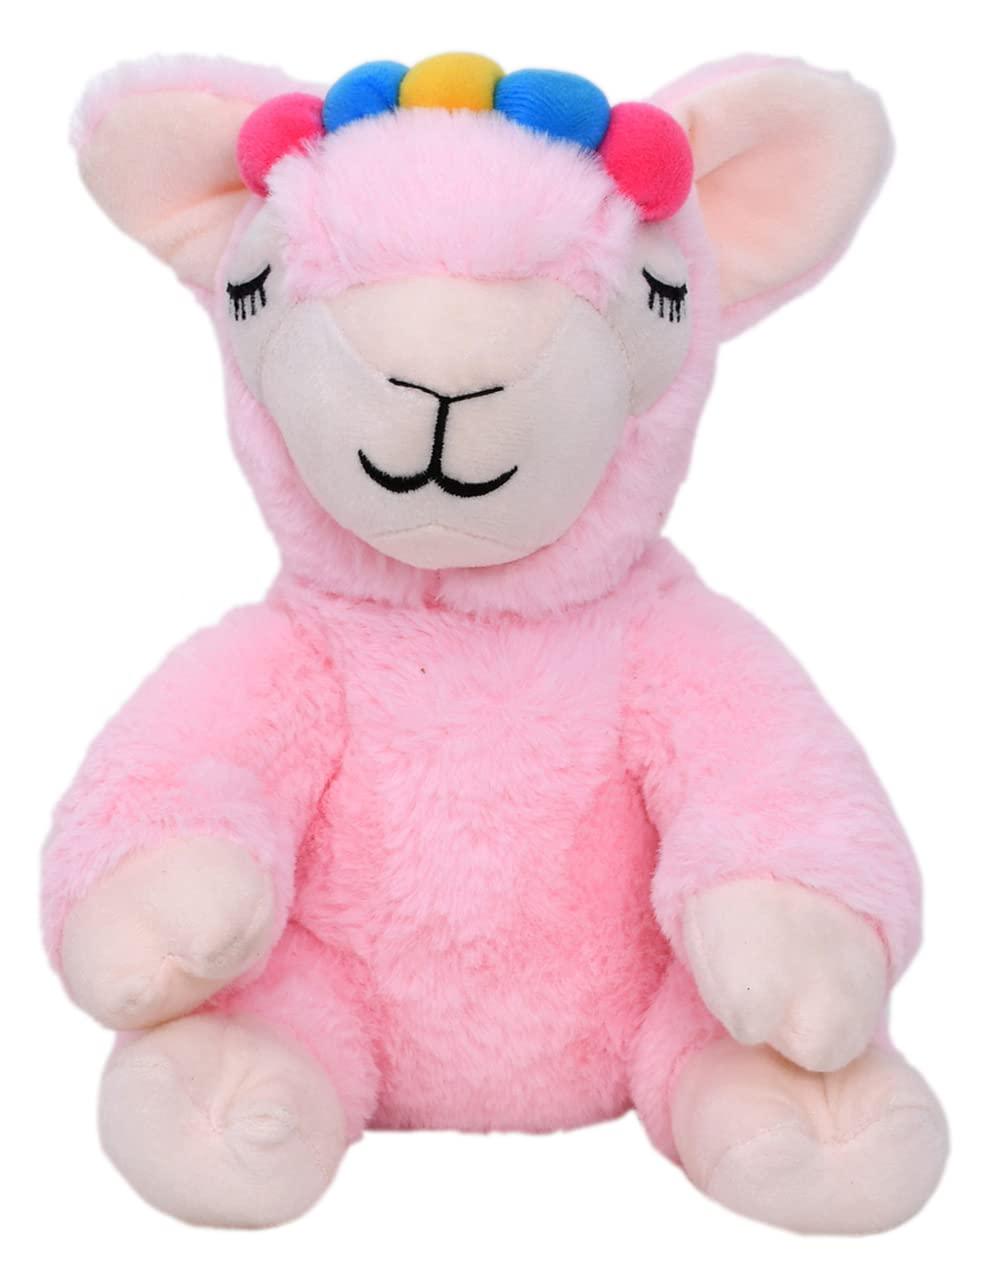 Mirada Cute Pink Llama Coin Bank Soft Toy, Best Gift for Girls